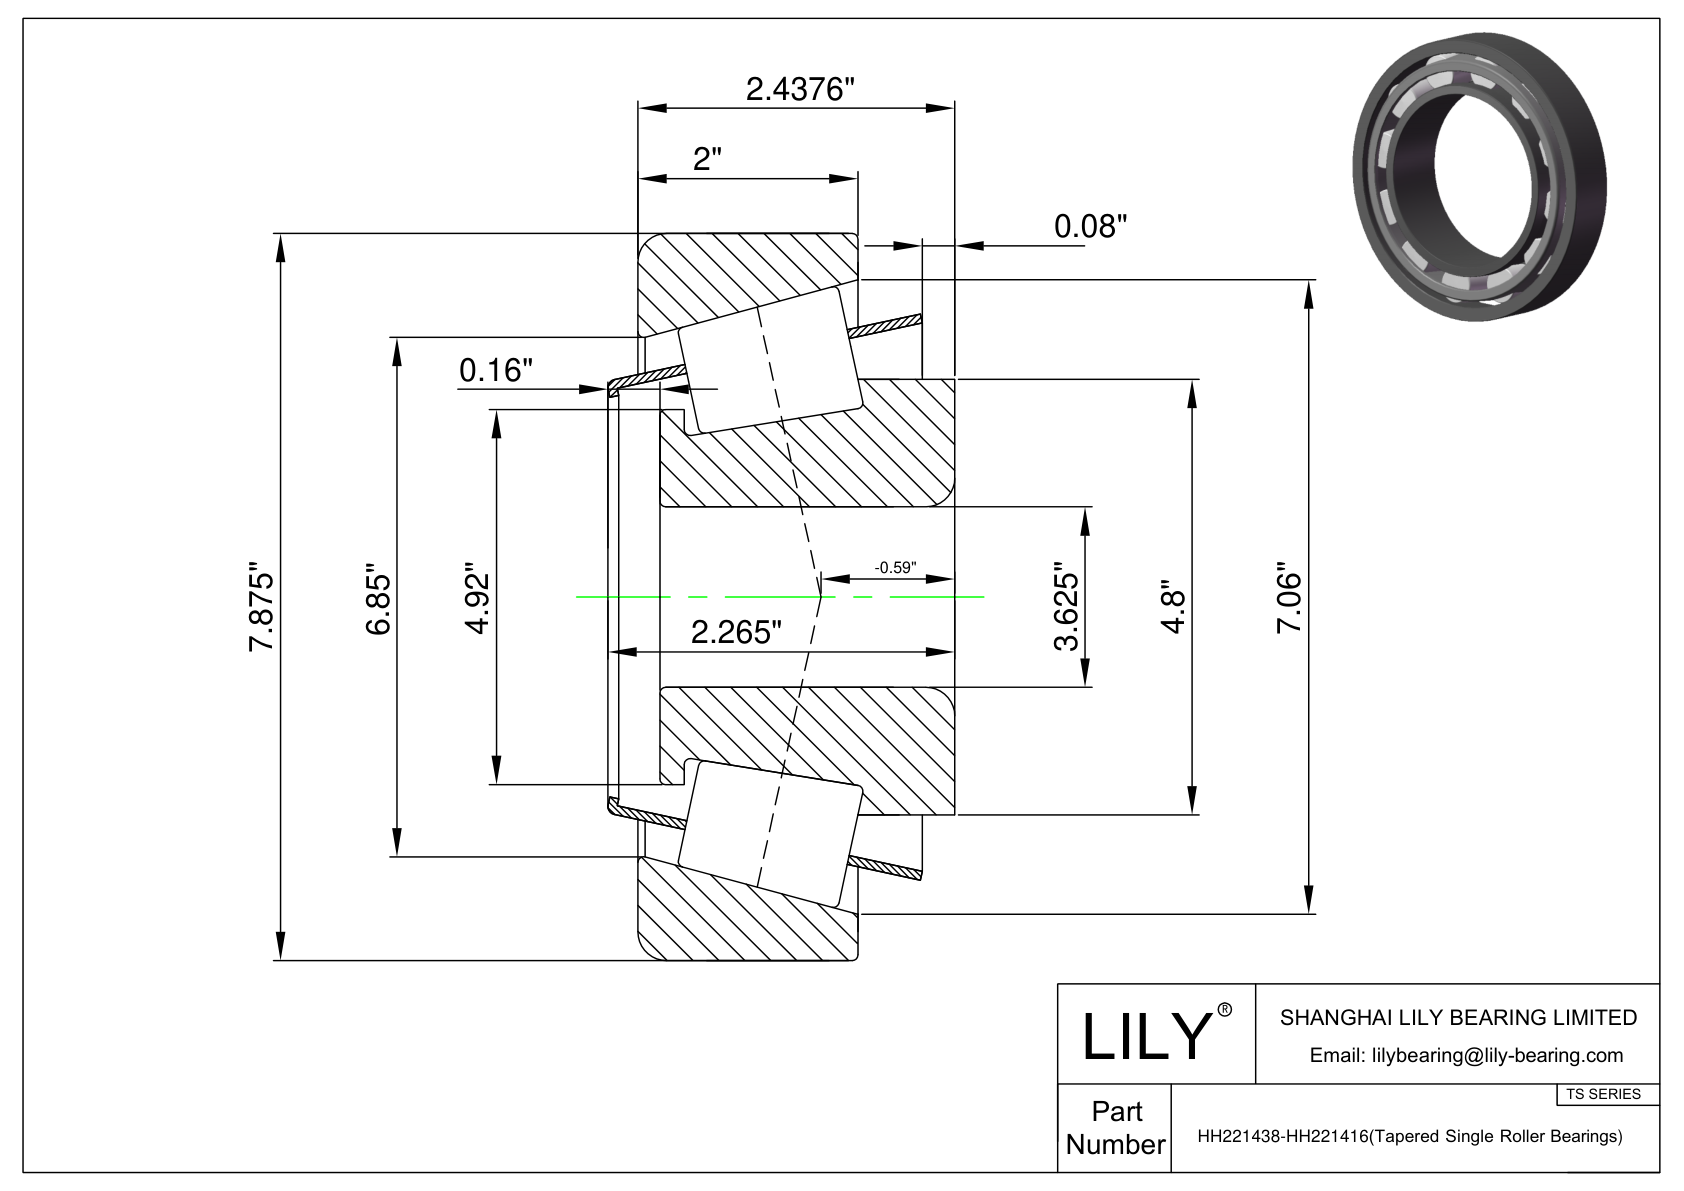 HH221438-HH221416 TS (Tapered Single Roller Bearings) (Imperial) cad drawing